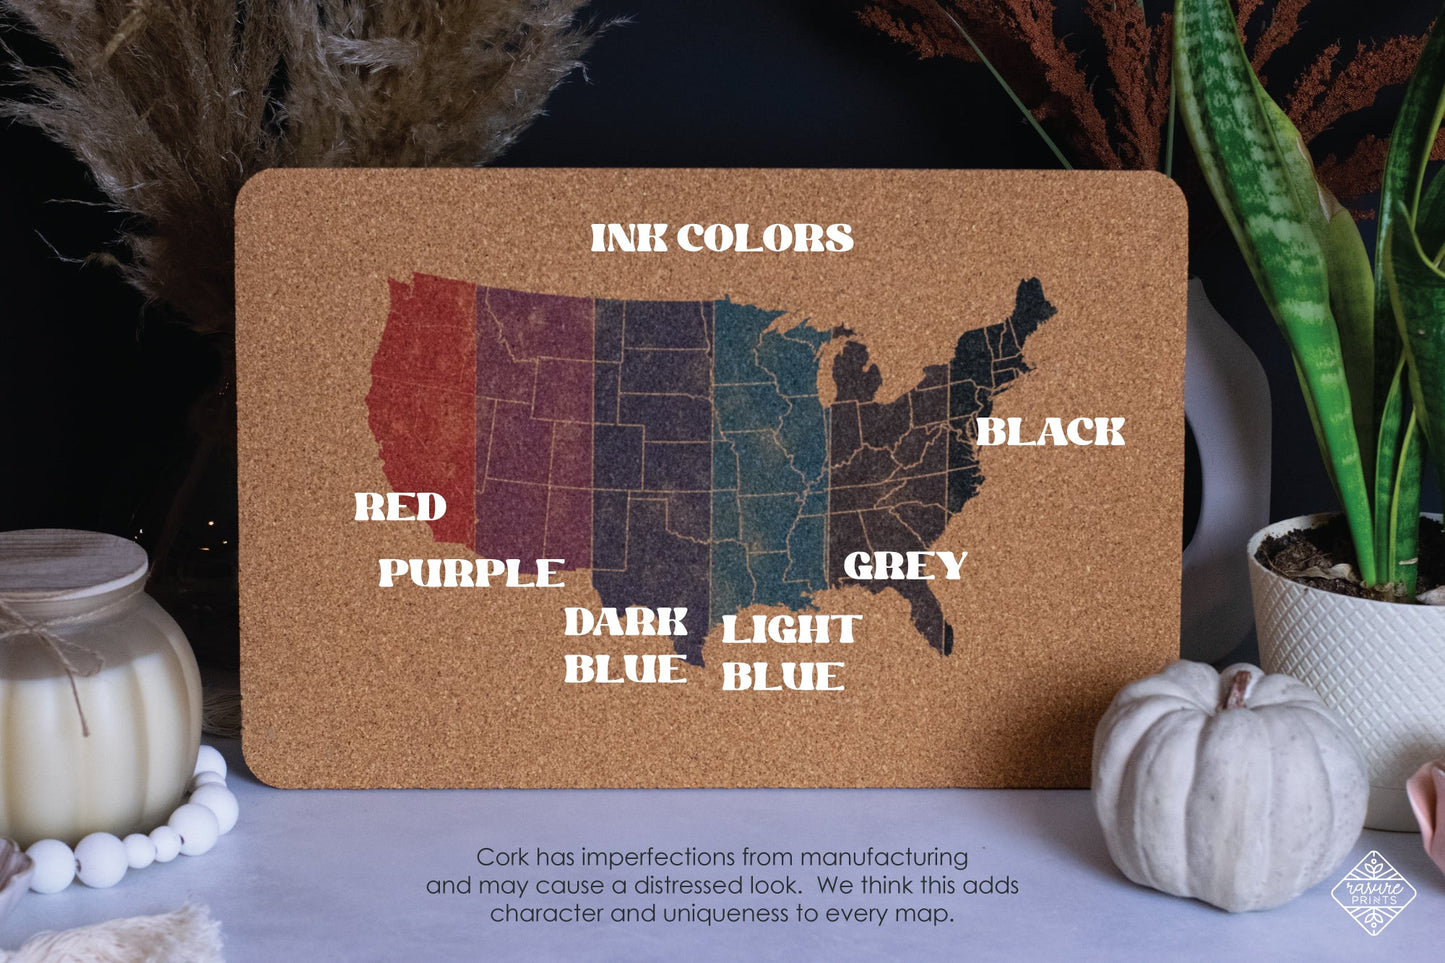 Life was meant for good friends and great adventures - Cork Travel Map; Push Pin Cork Travel Map, USA Travel Map